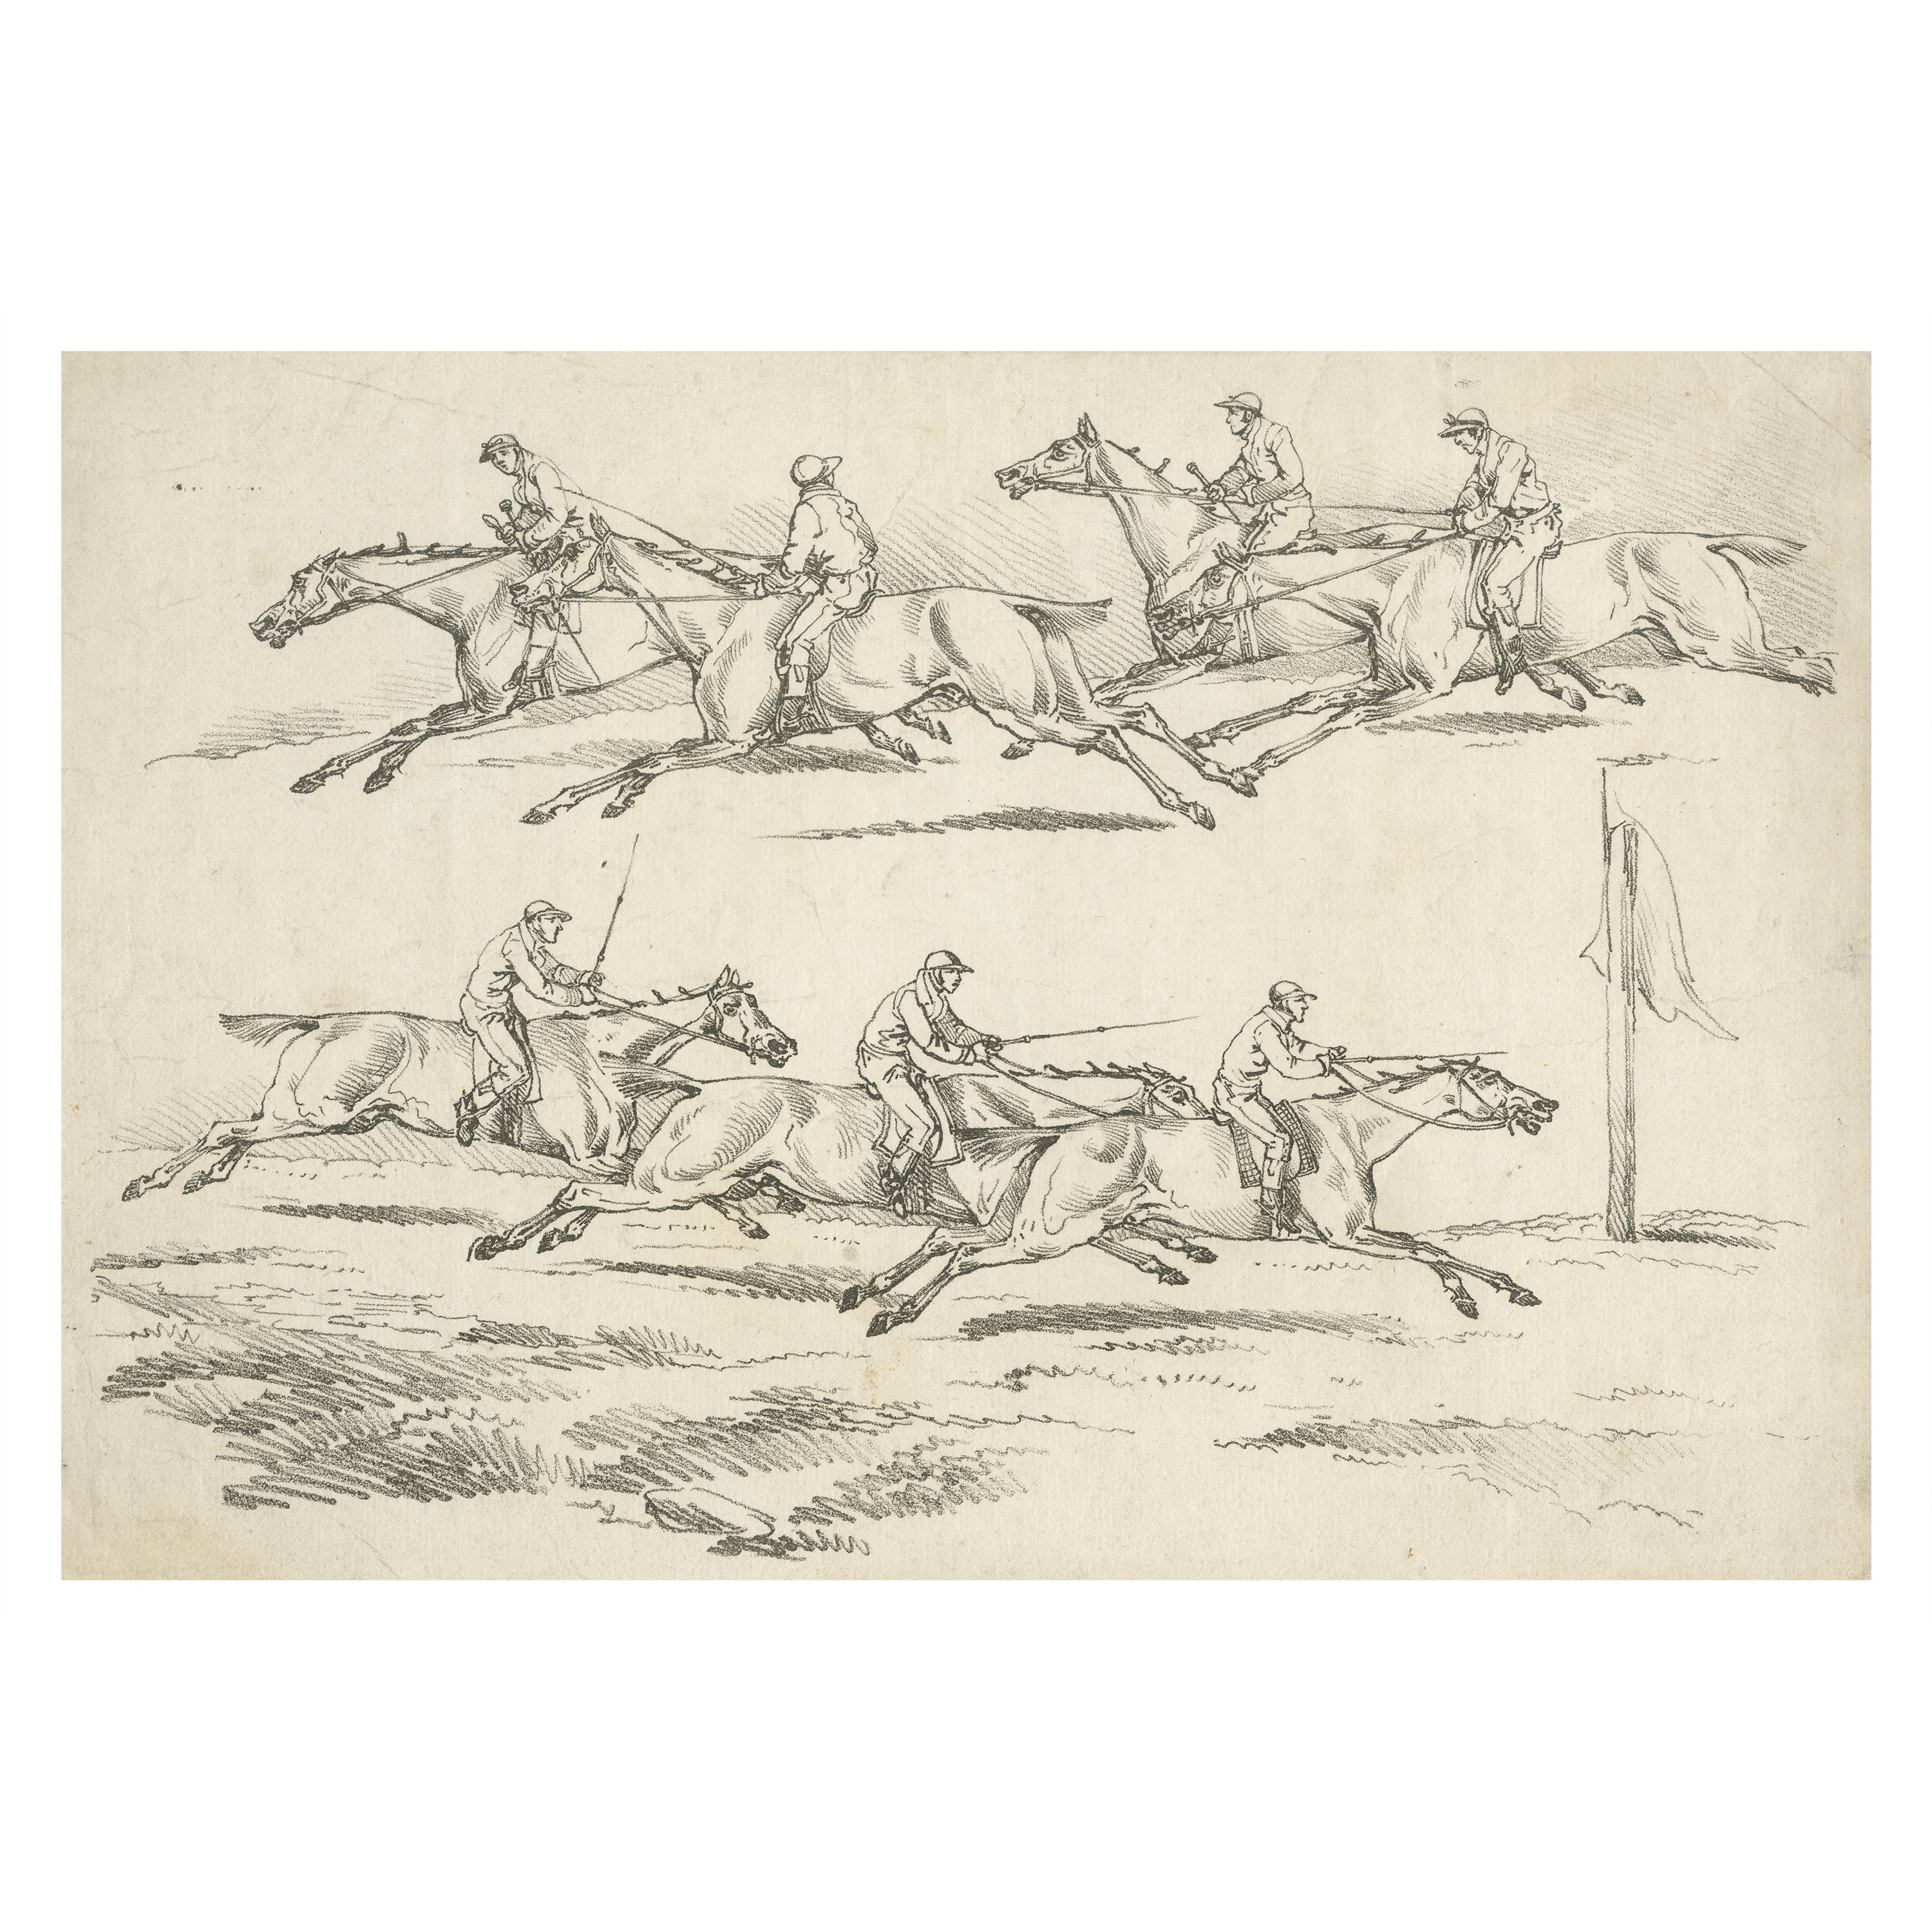 Original Uncolored Antique Print of a Horse Race in England, 1817